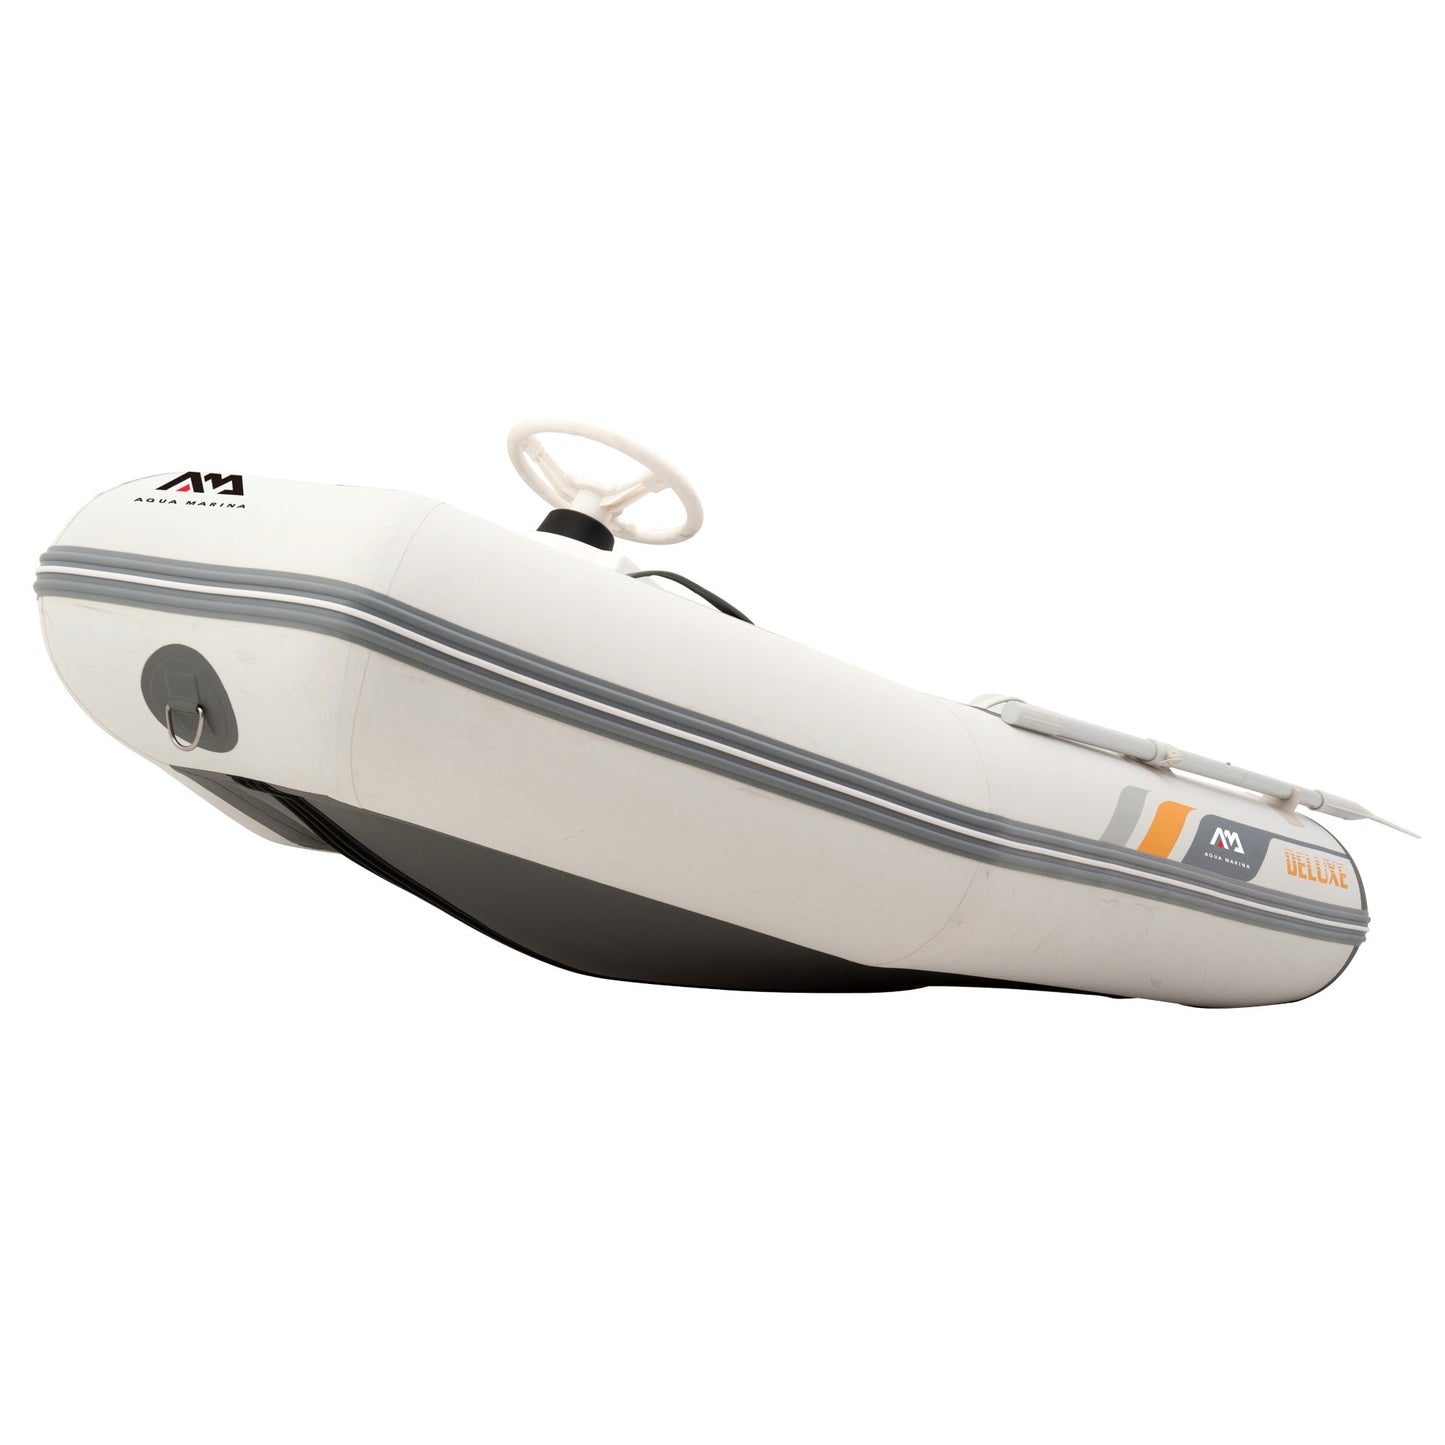 A-Deluxe 3.6m Inflatable Speed Boat (Aluminum Deck)